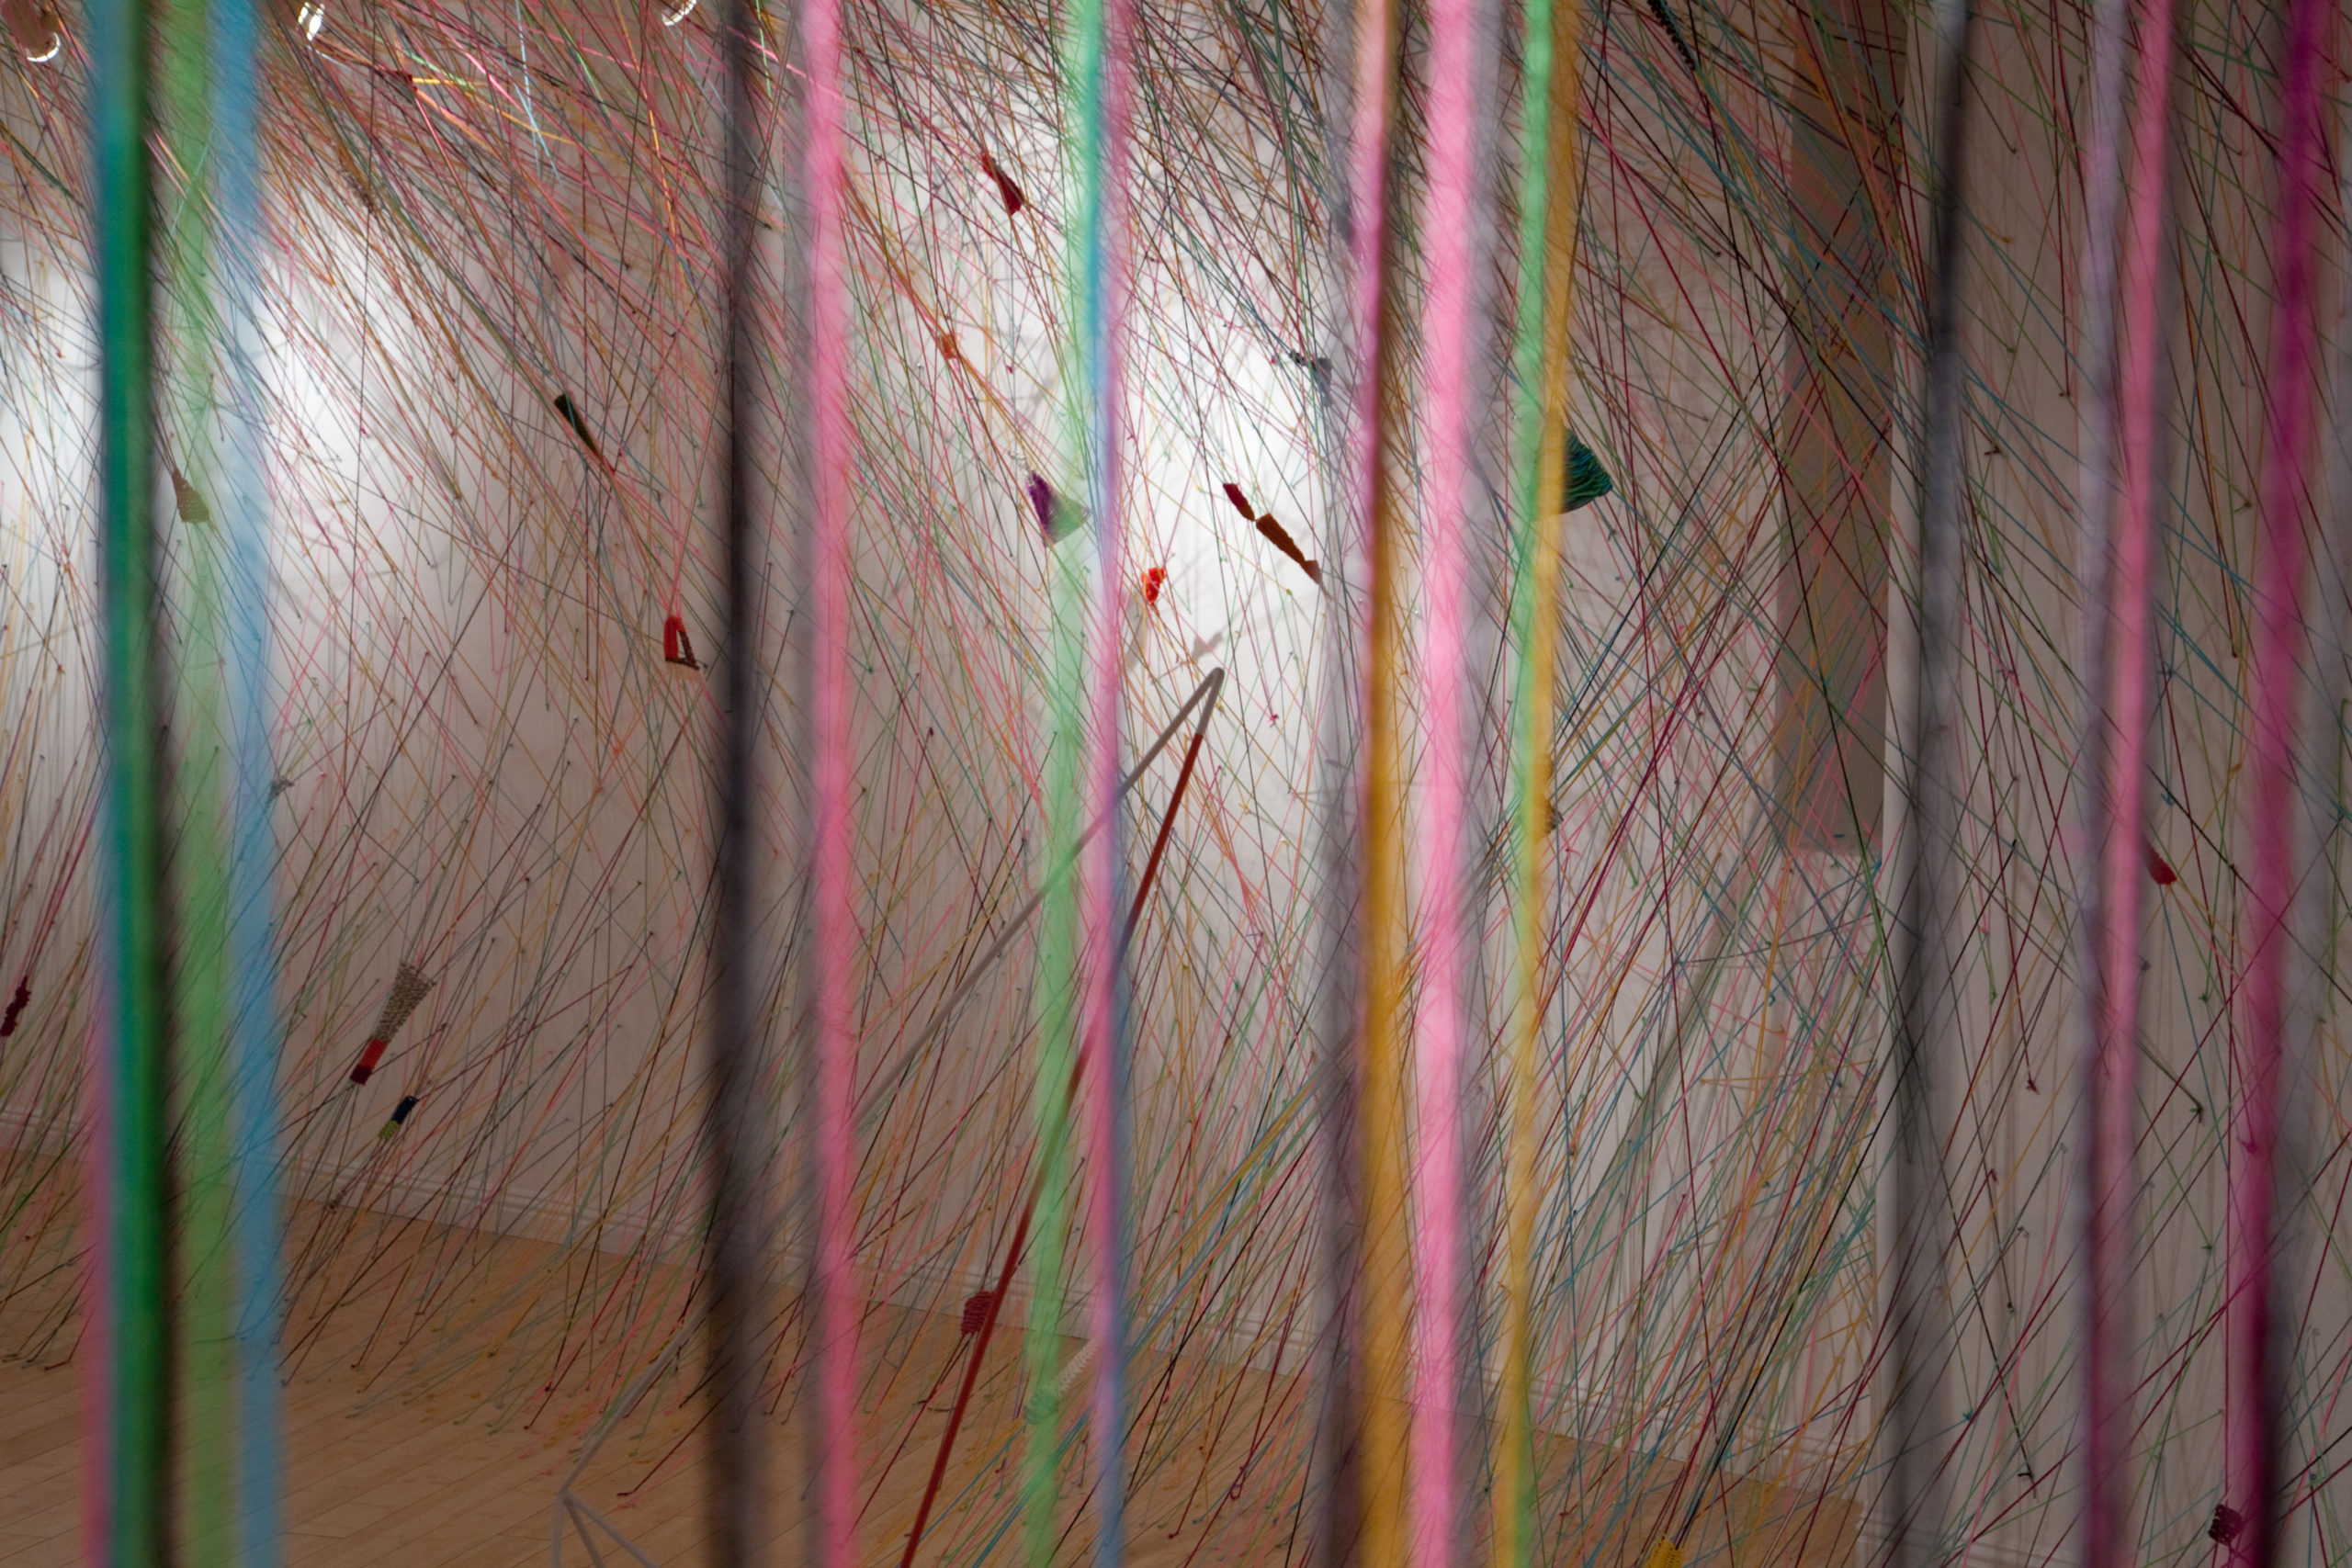 Crossing the Line: A Space by Tanya Aguiñiga, installation view, 2011.